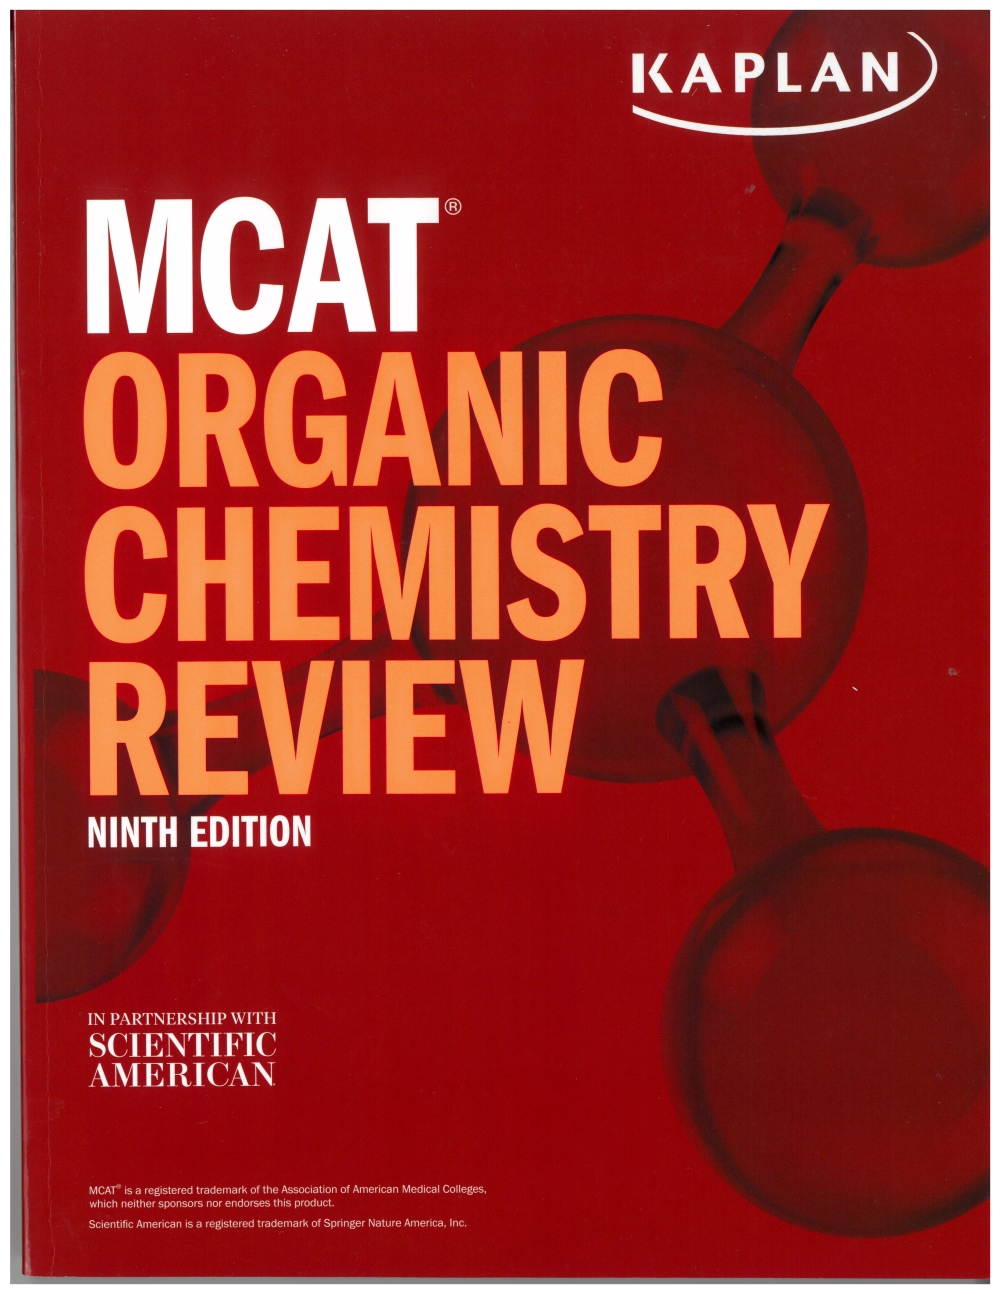 MCAT Organic Chemistry Review 9th Edition